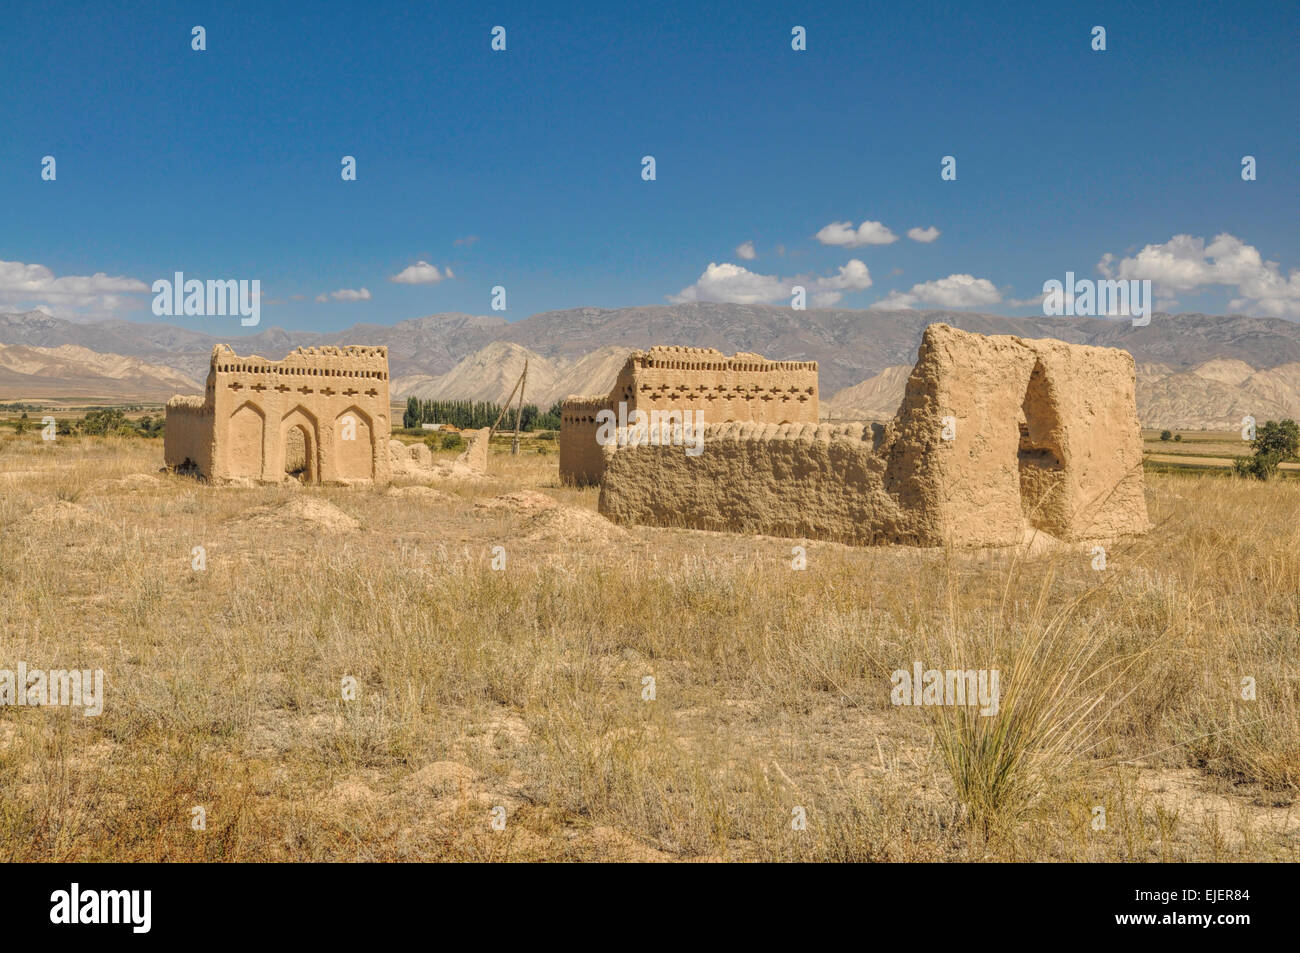 Ruins of ancient temple on arid landscape in Kyrgyzstan Stock Photo